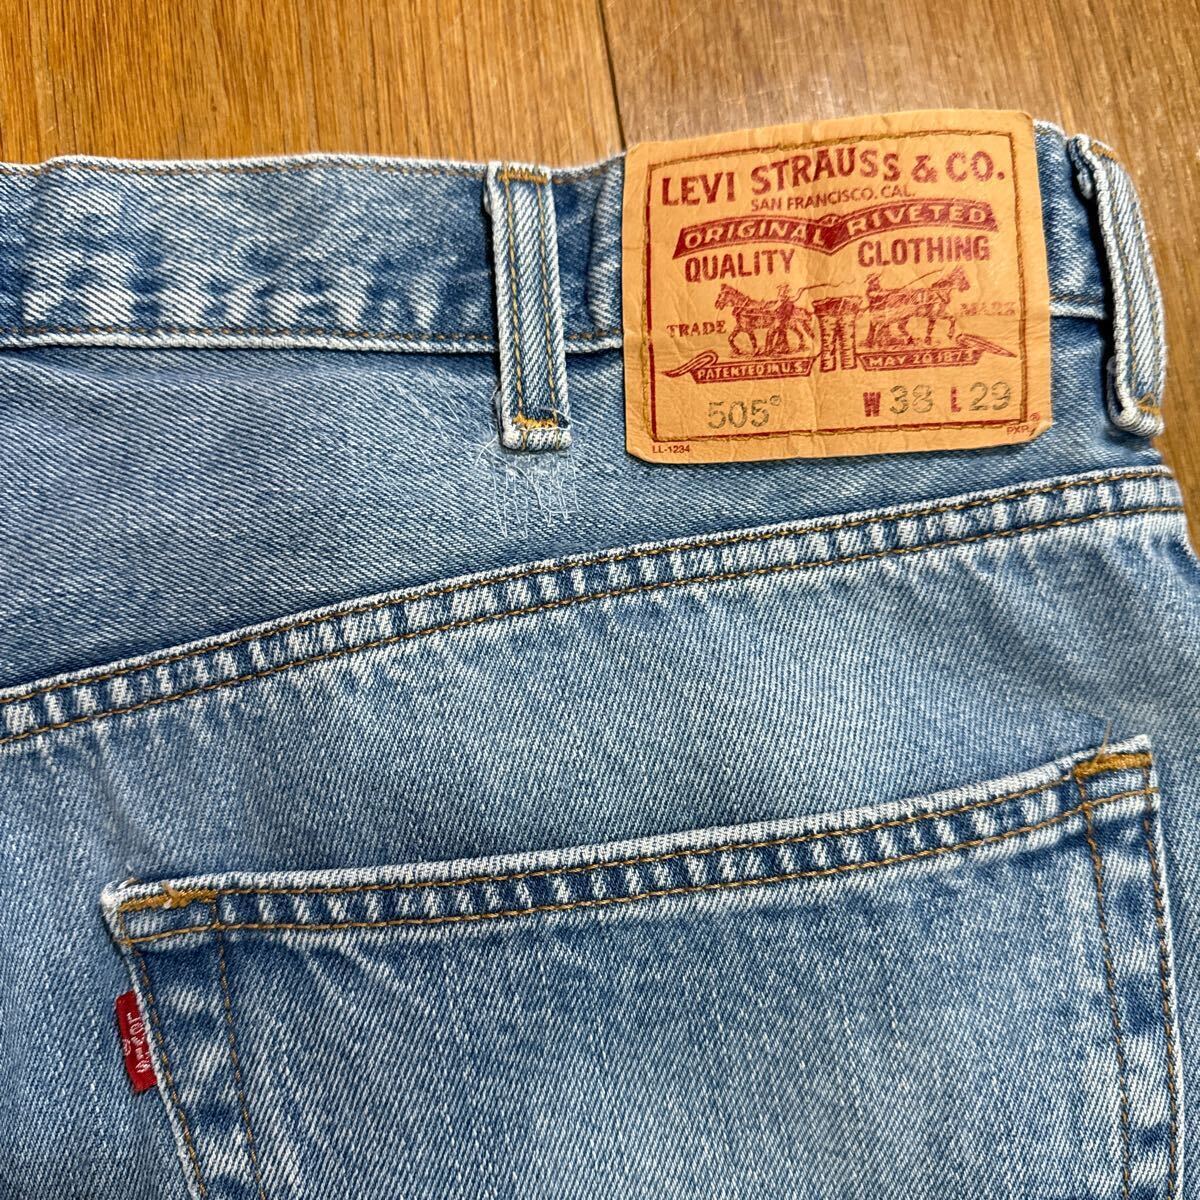 Levi 505 W38L29 flat putting W approximately 49cm length of the legs approximately 73cm Levi's jeans regular Fit USA Levi's made in LESOTHO damage crash 